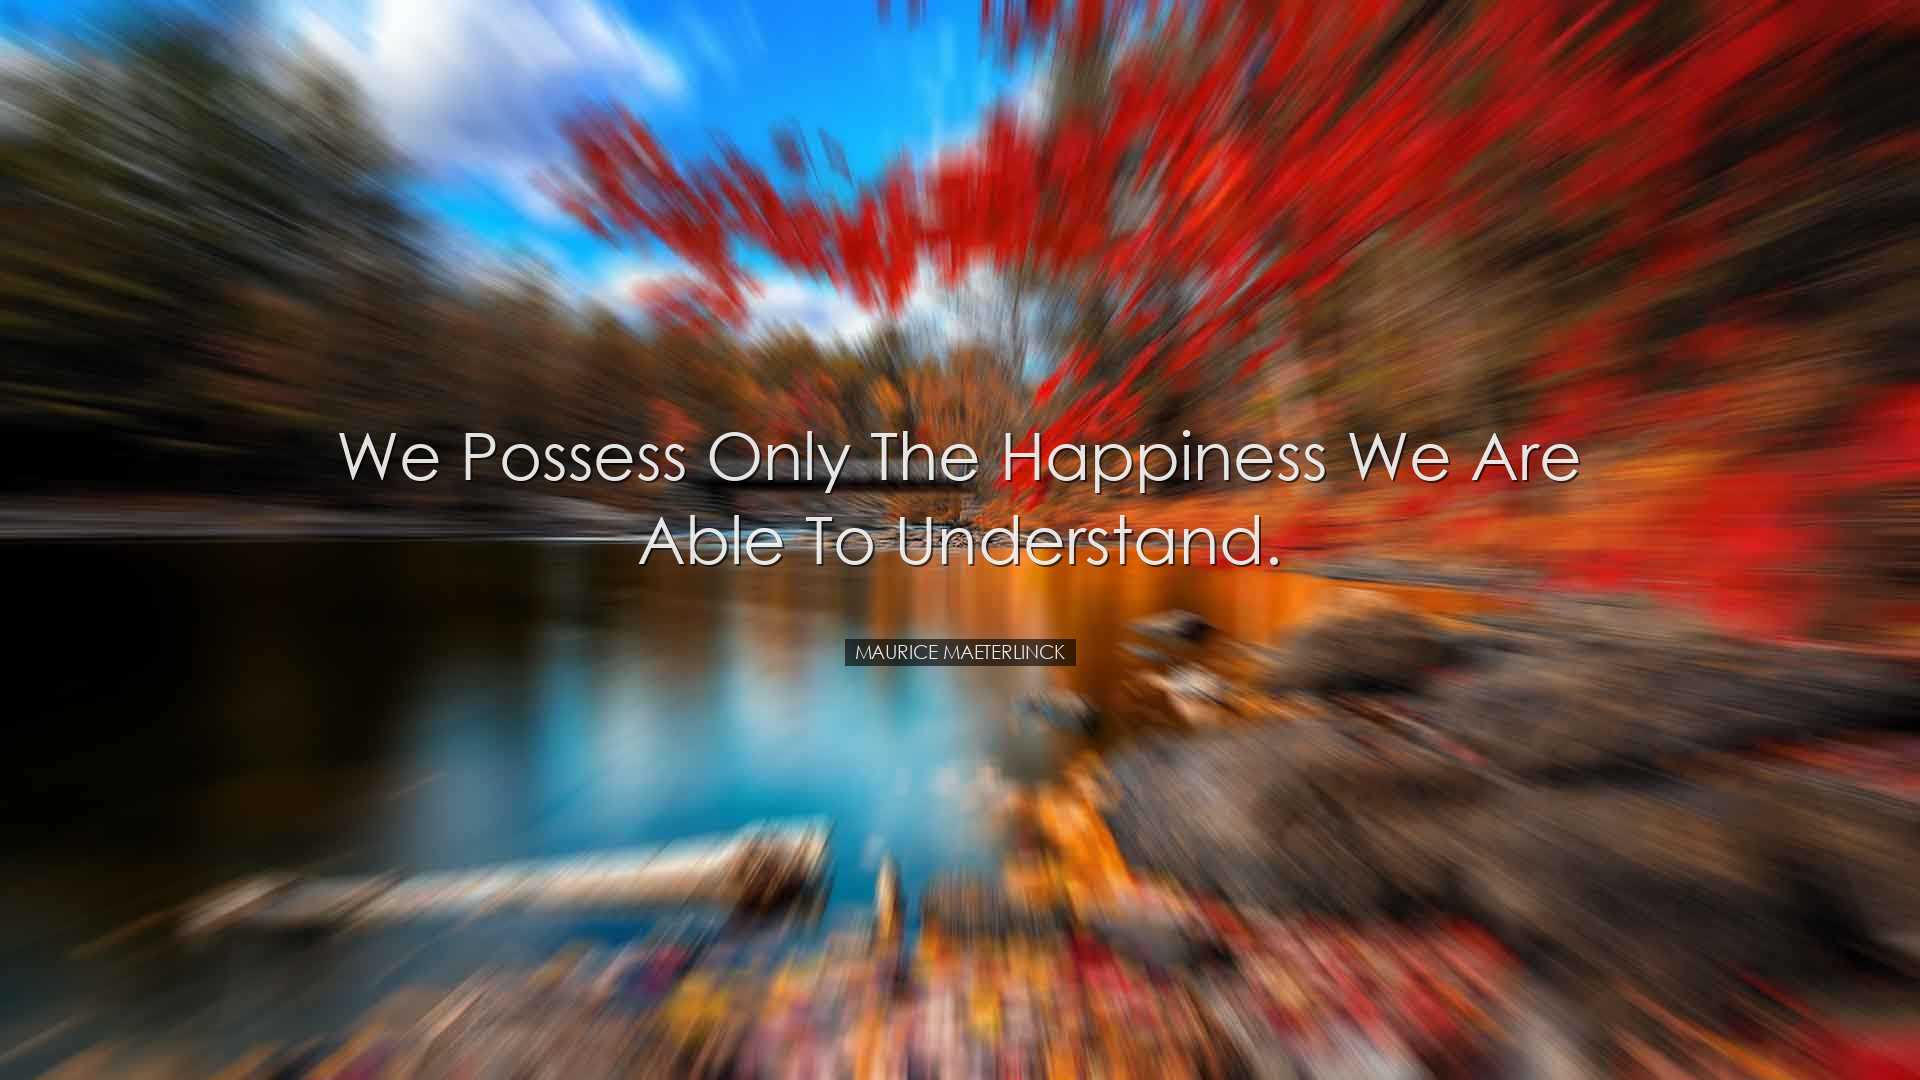 We possess only the happiness we are able to understand. - Maurice